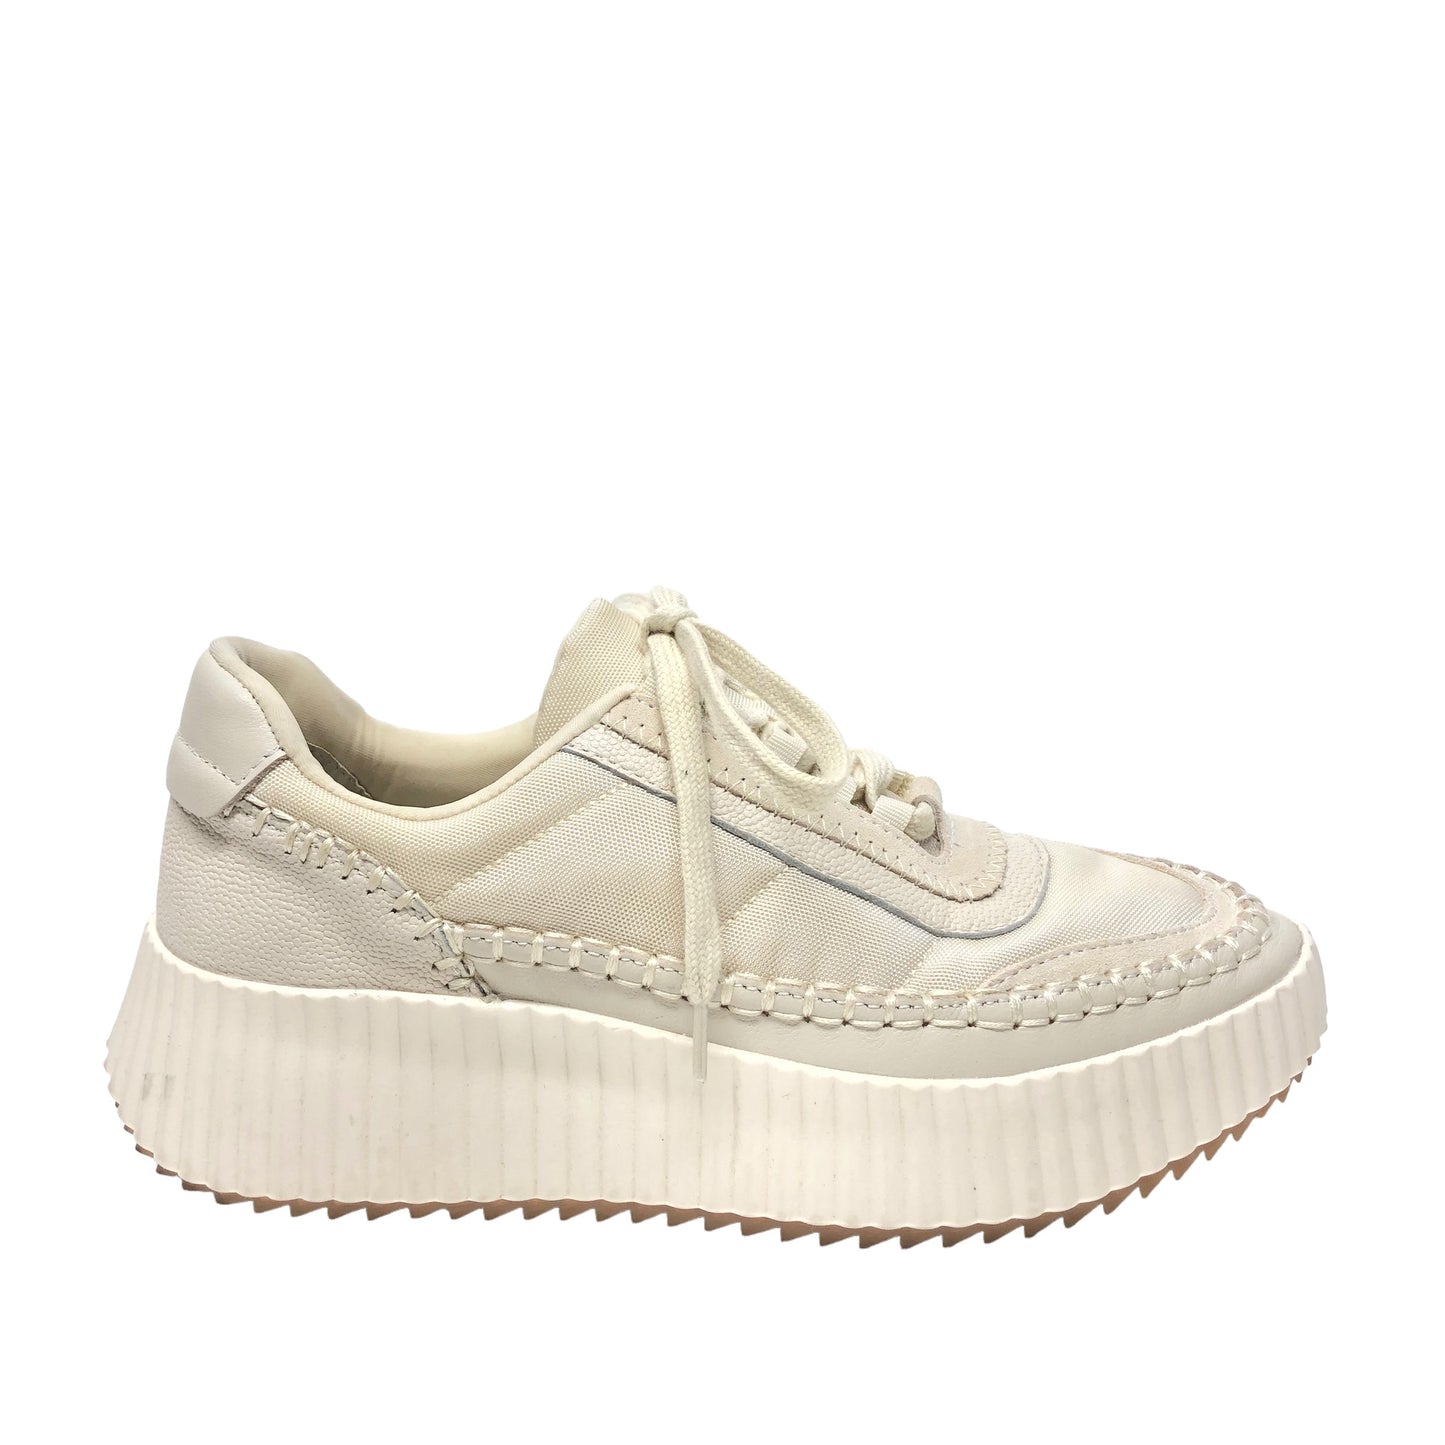 Cream Shoes Sneakers Dolce Vita, Size 8